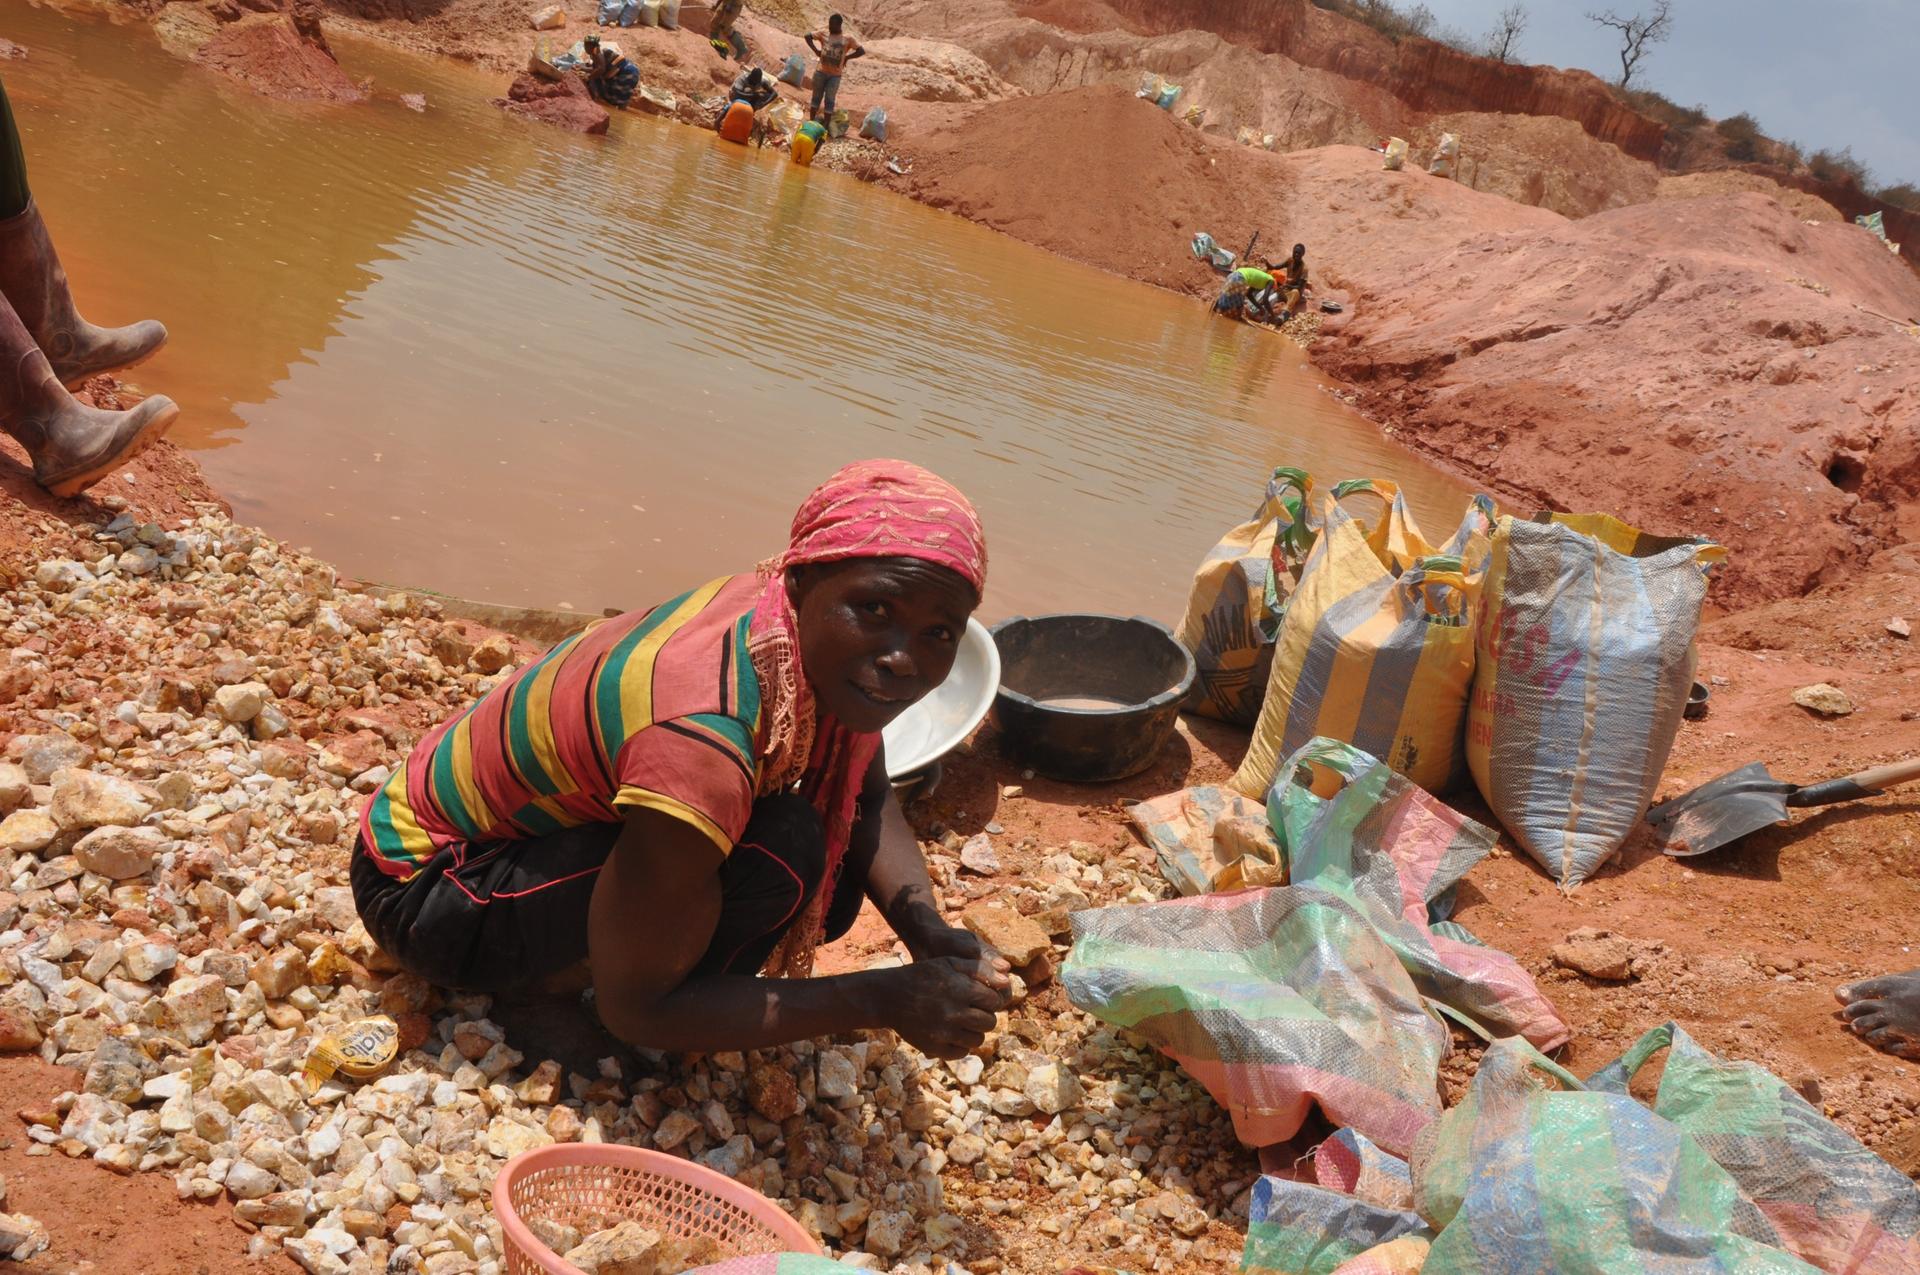 Sidonie Maboue, 45, a widow and mother, picks up small rocks from a mine site abandoned by Chinese miners. These pebbles are later crushed and sieved to collect gold.